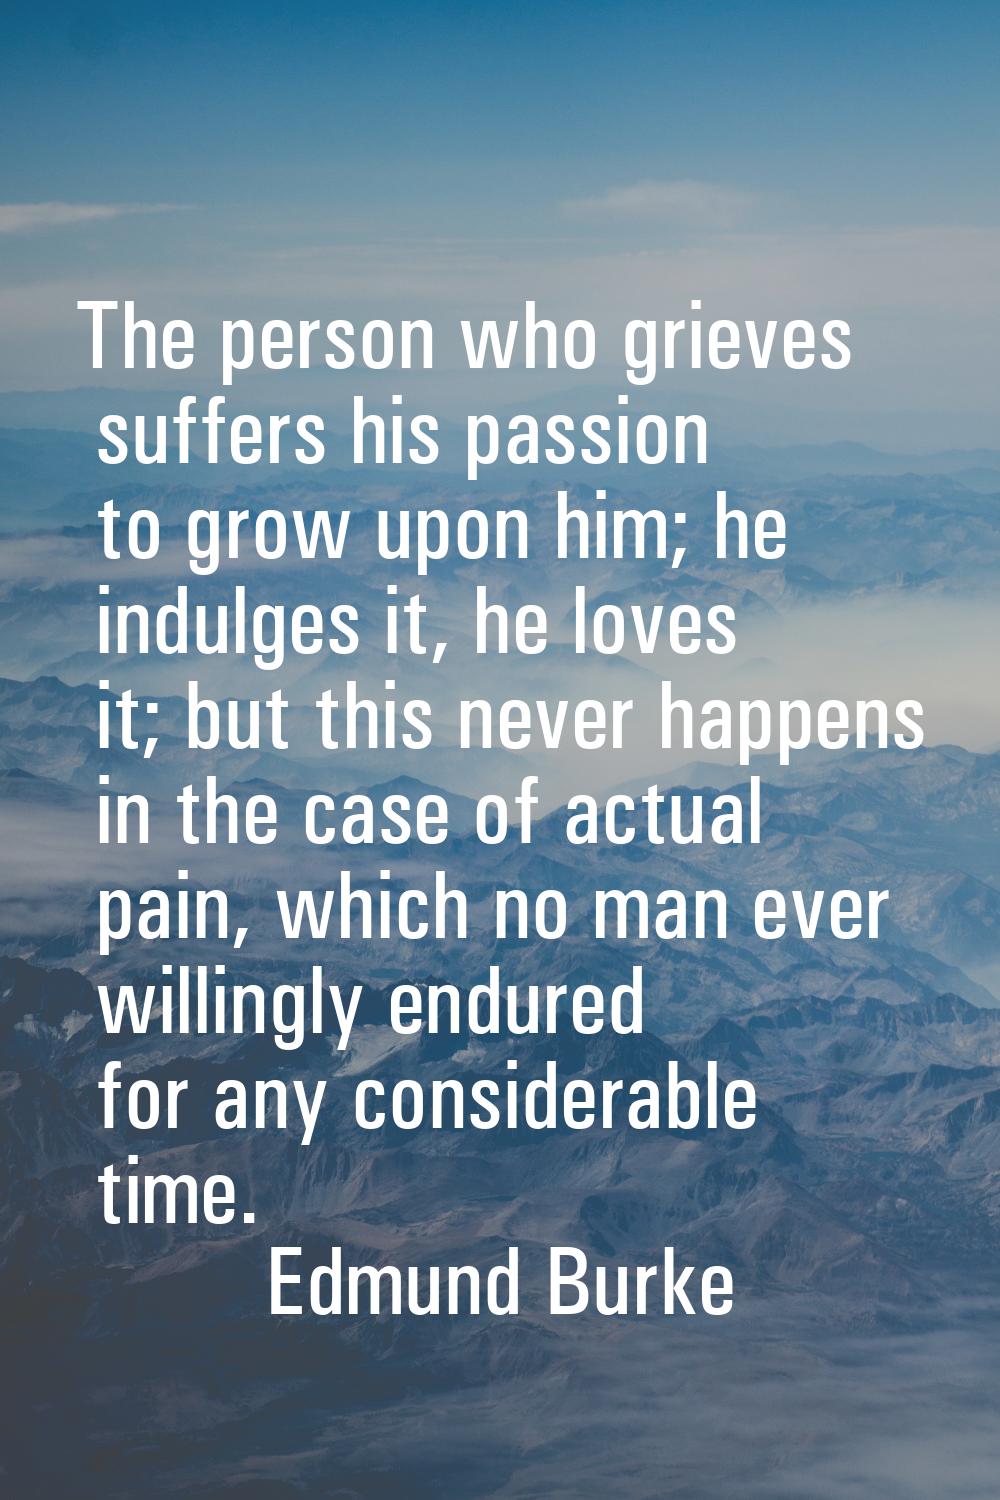 The person who grieves suffers his passion to grow upon him; he indulges it, he loves it; but this 